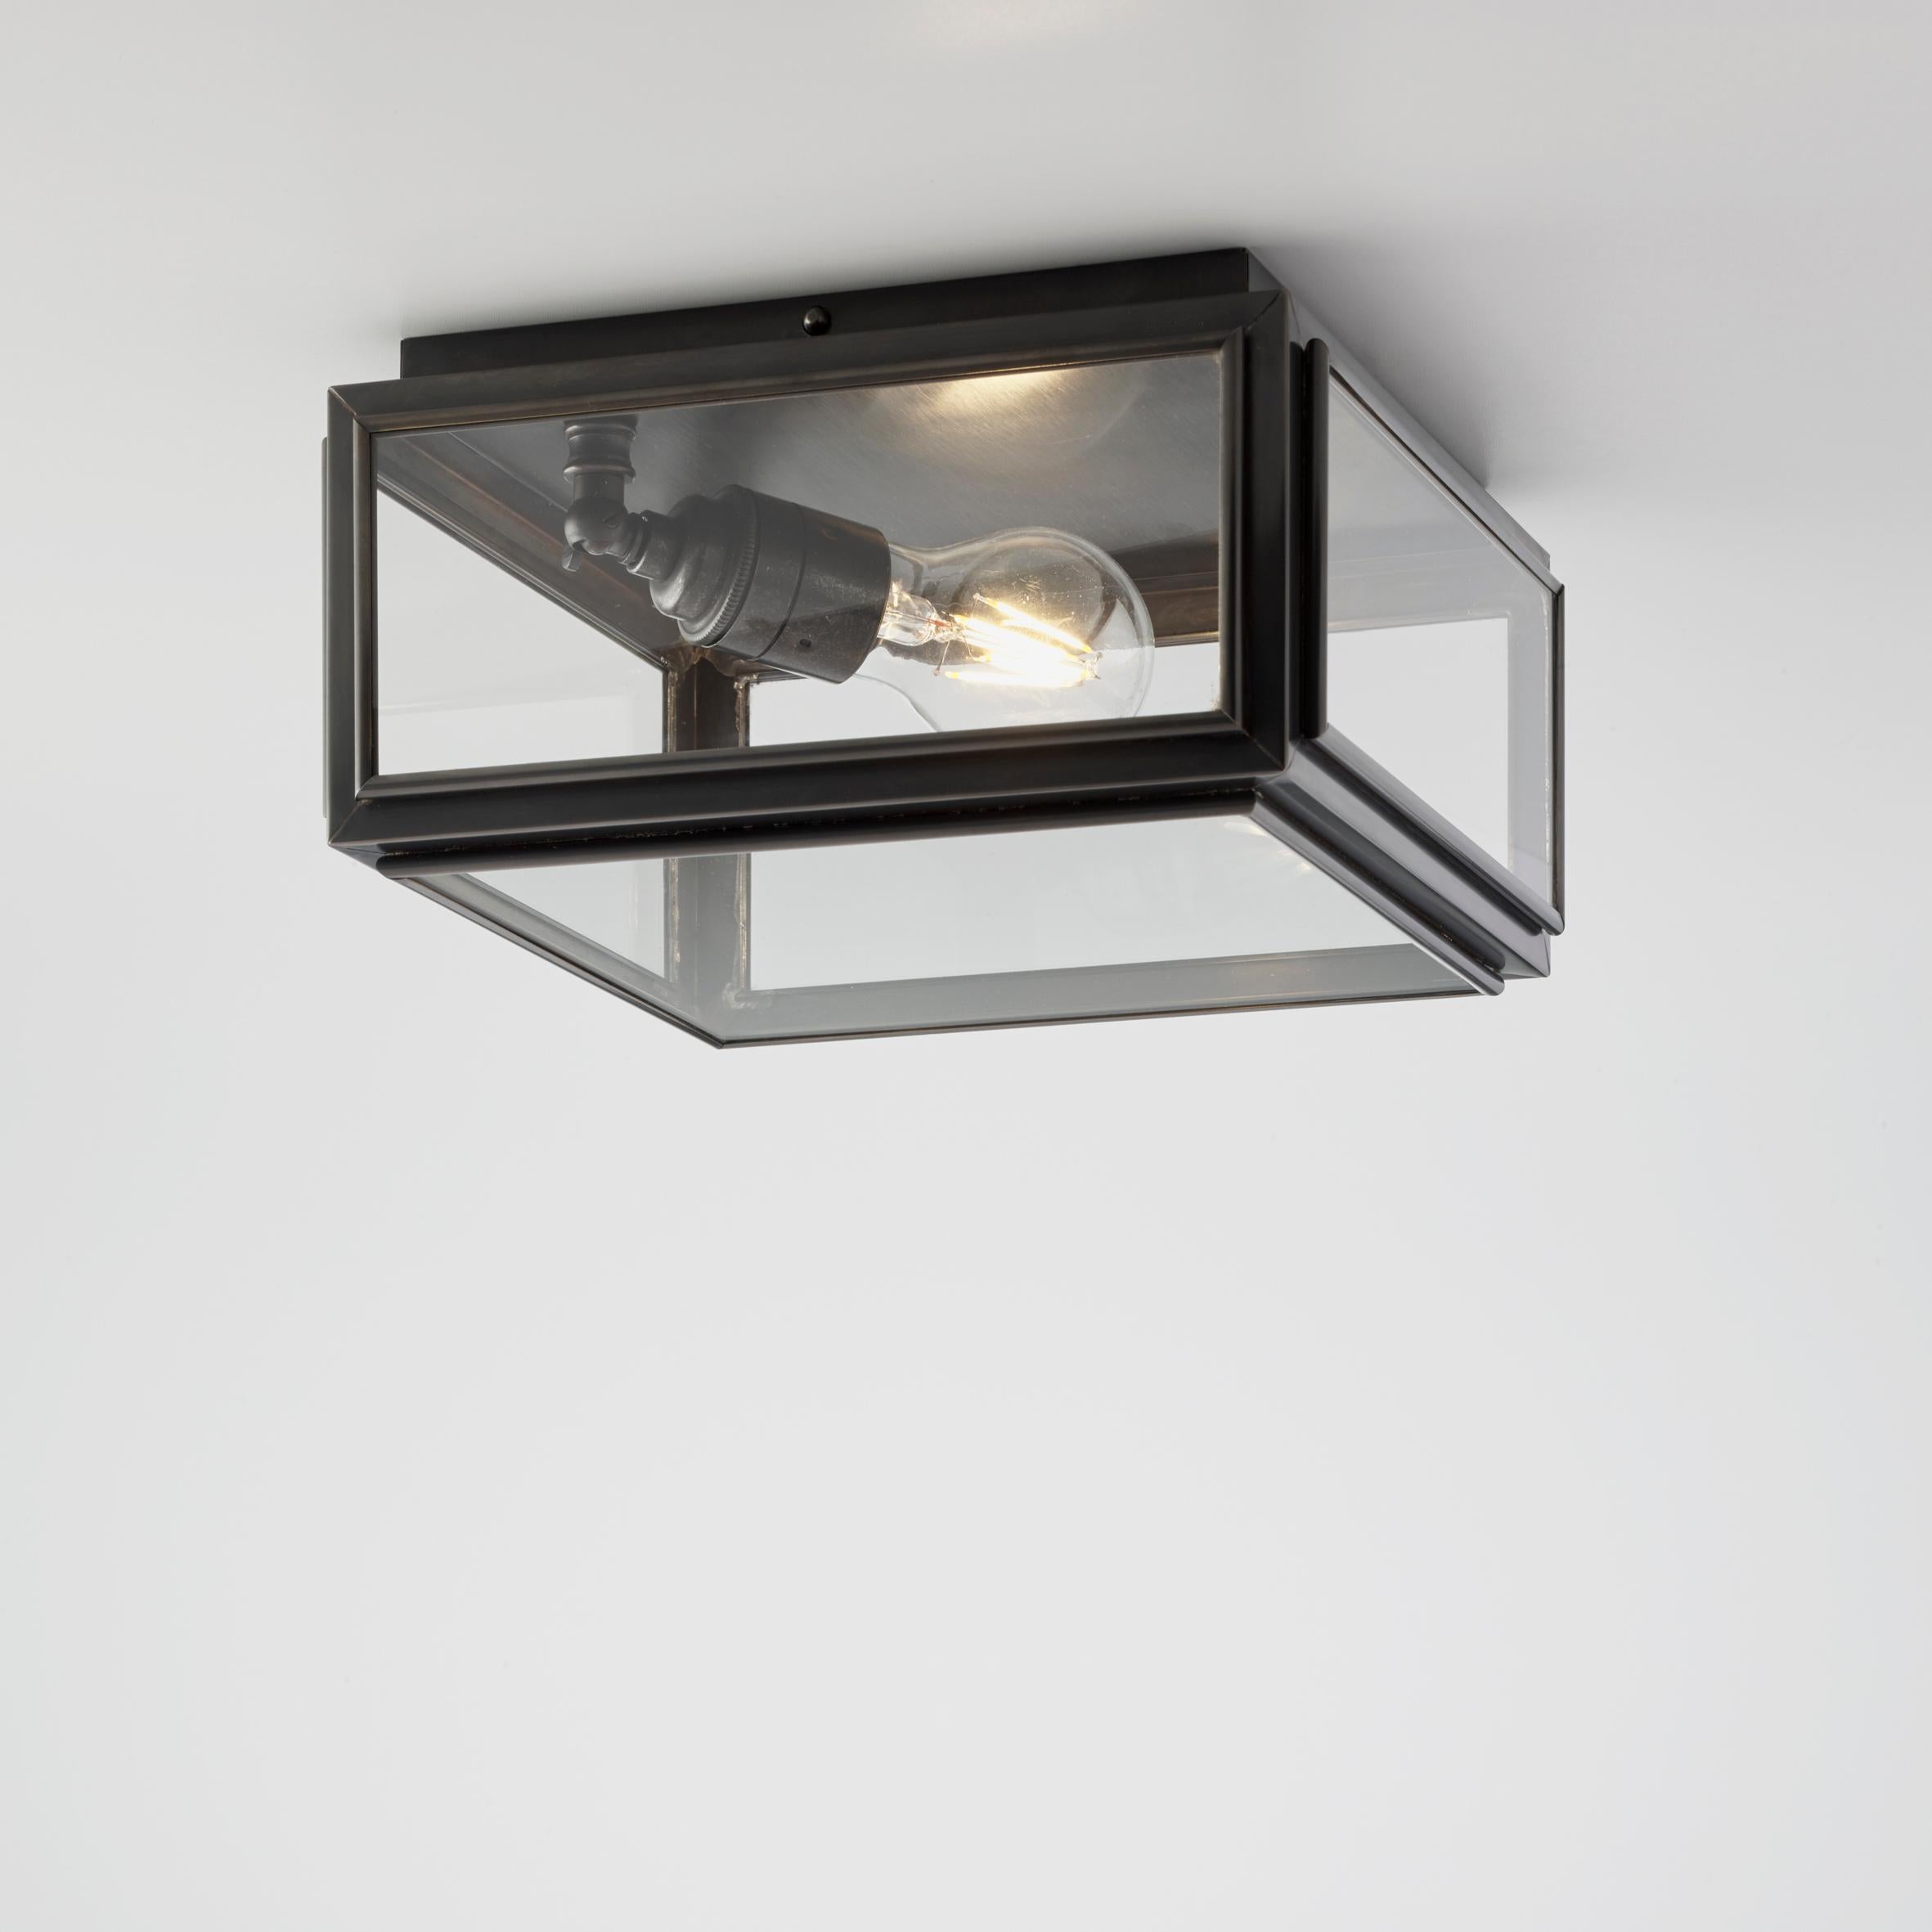 Tekna Chelsea Small Ceiling Light with Dark Bronze Finish and Frosted Glass For Sale